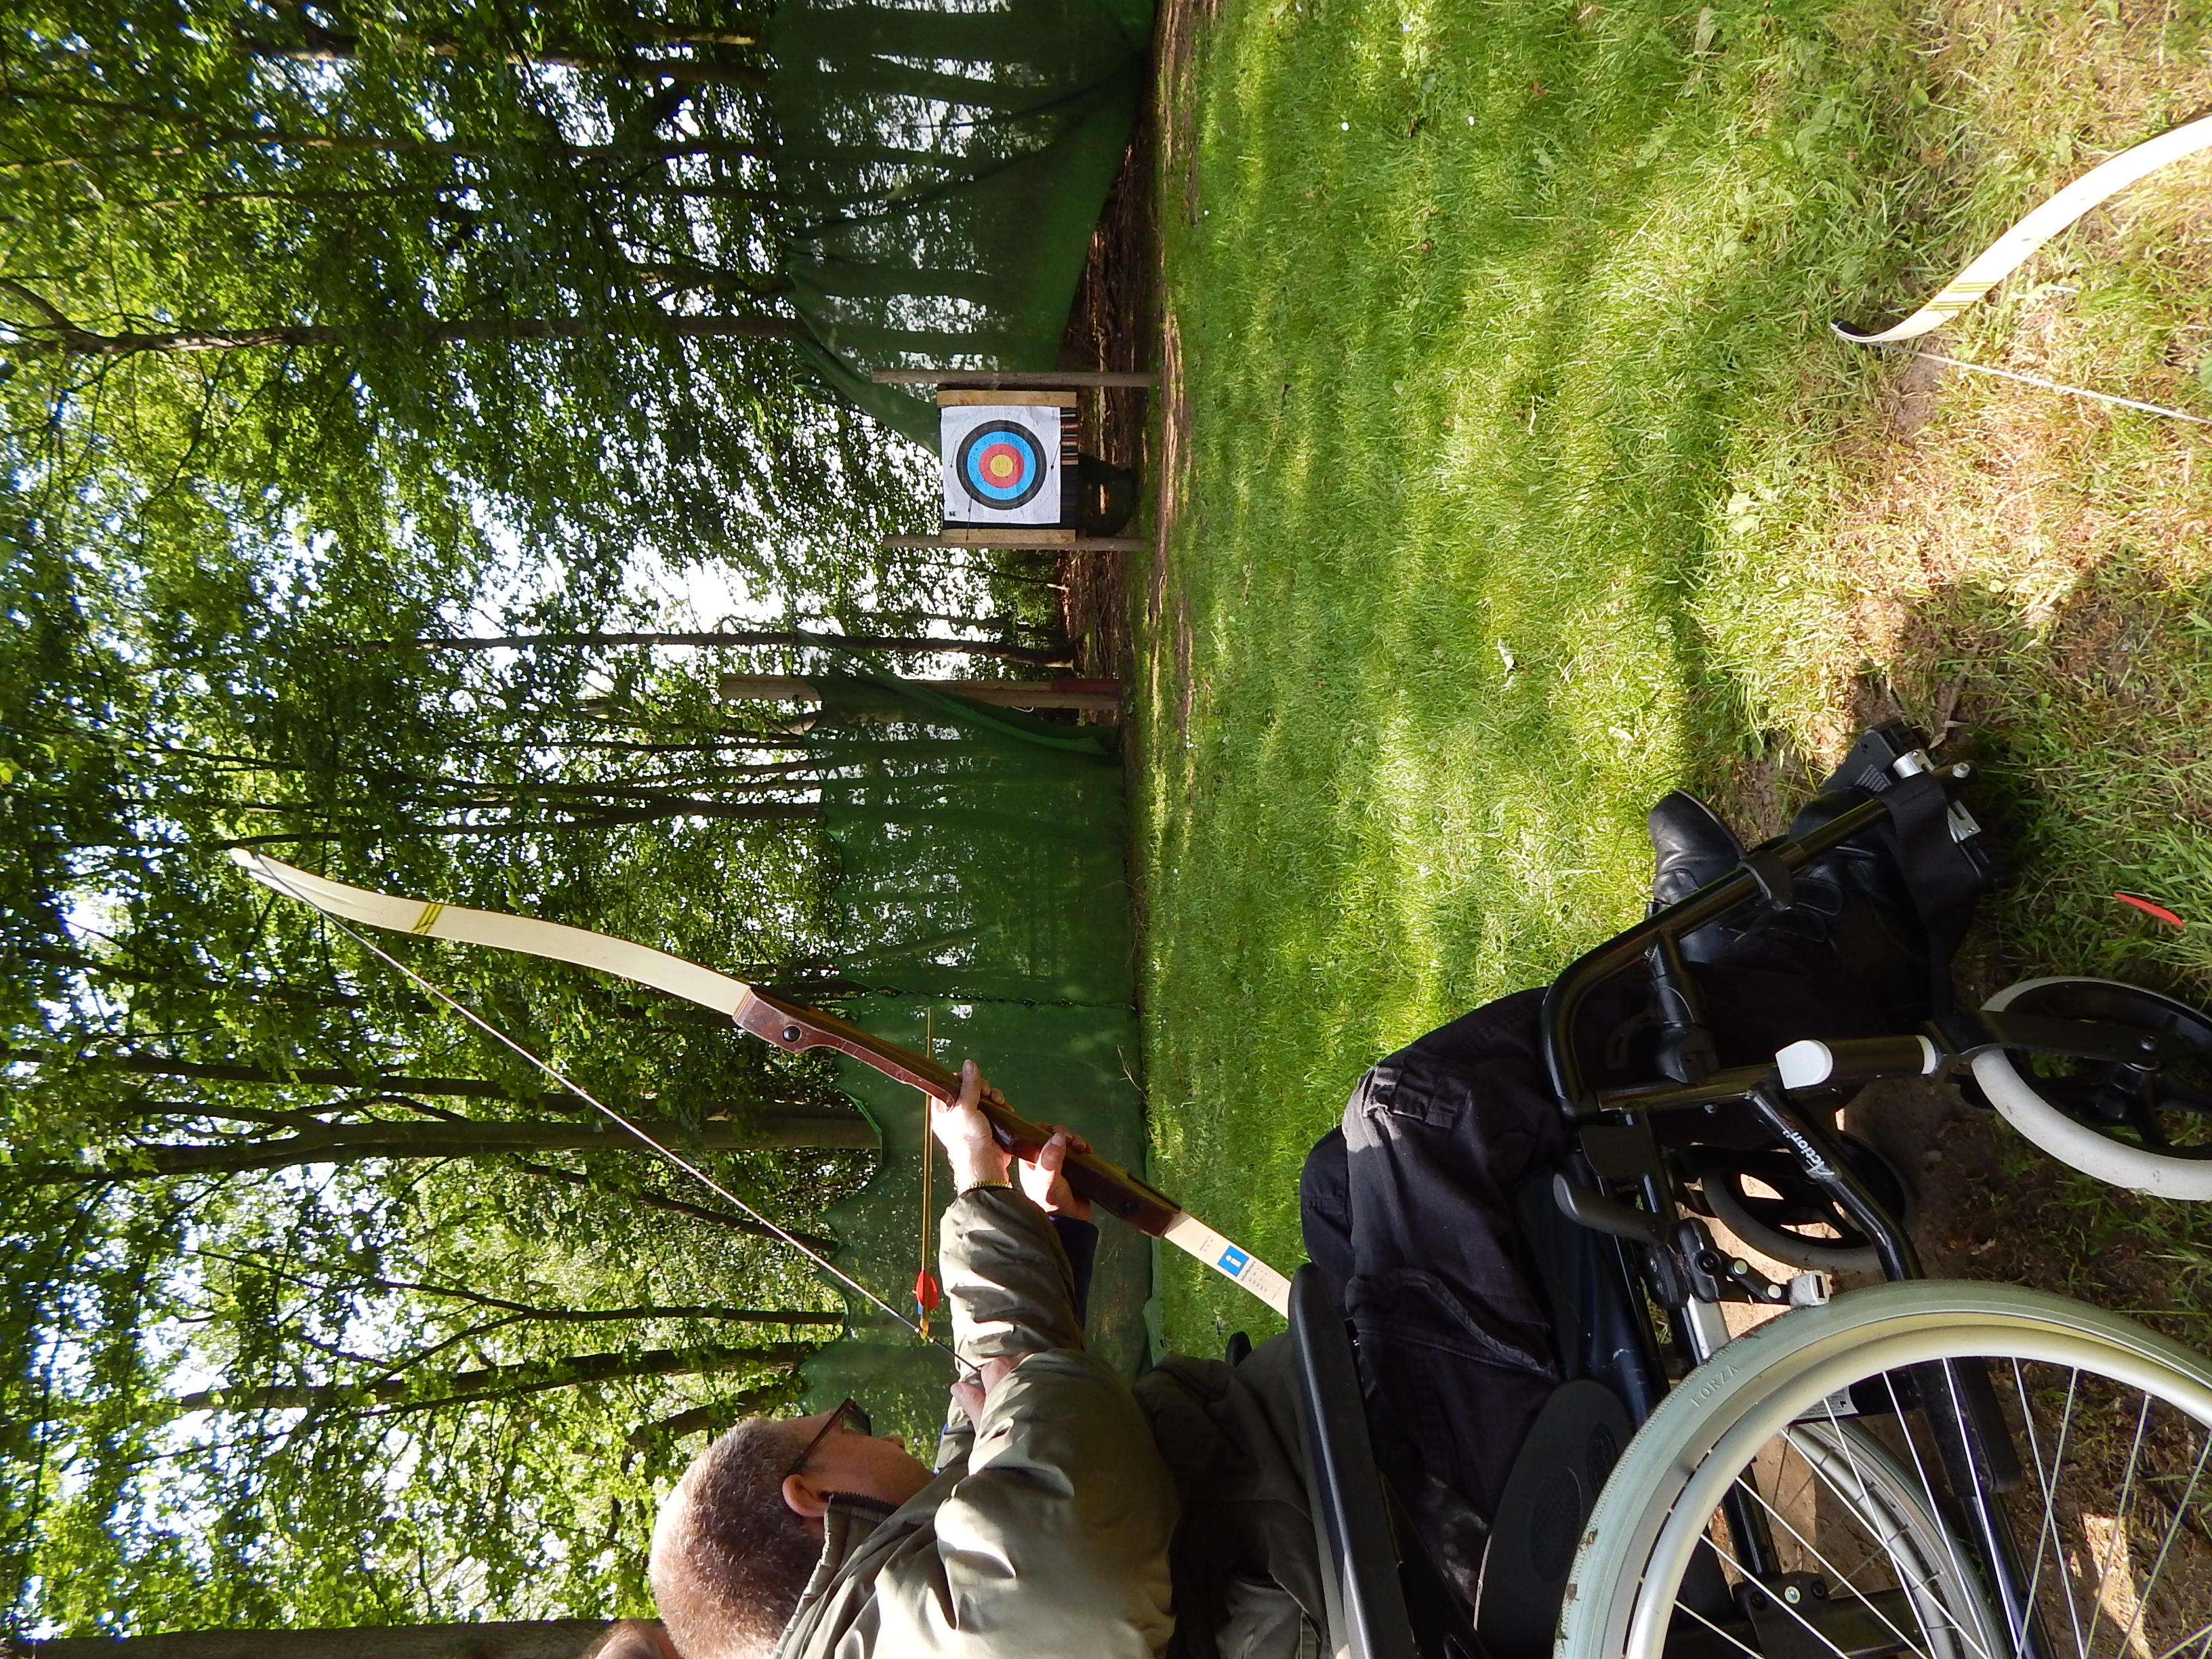 A man in a wheelchair doing archery on grass with woods behind.